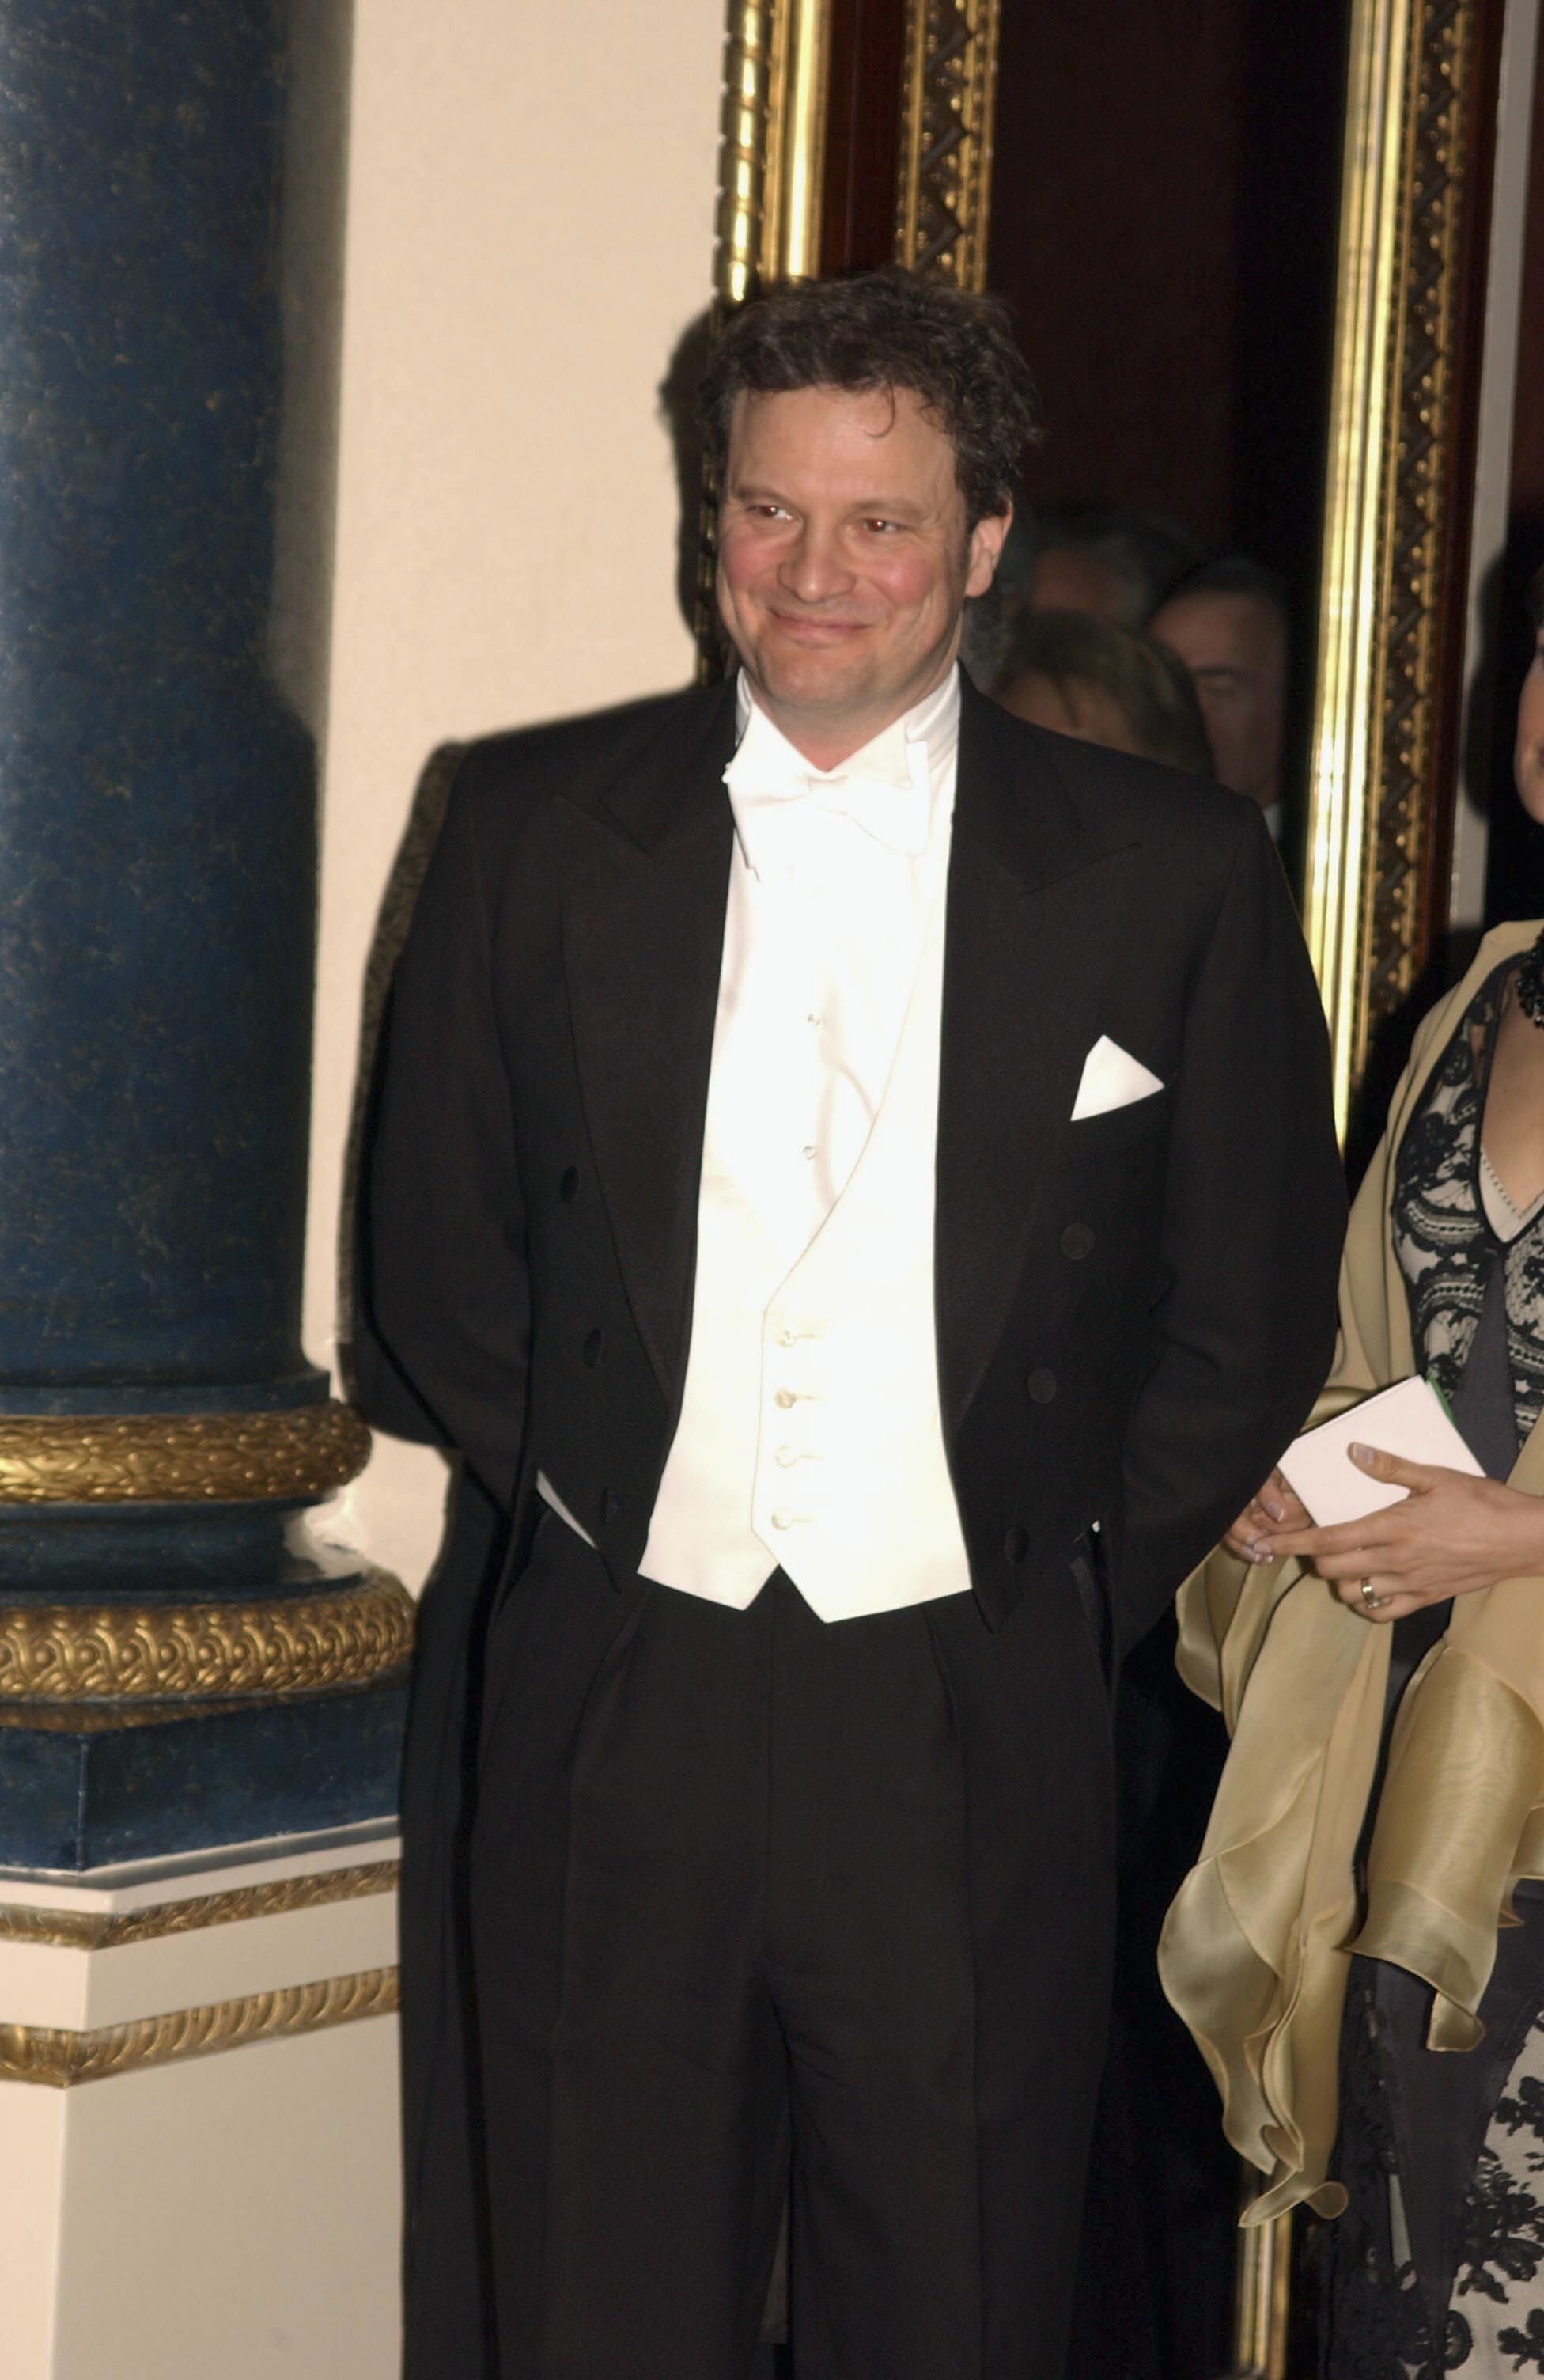 Colin Firth attends The Queen welcome of the Italian Republic President. | Source: Getty Images